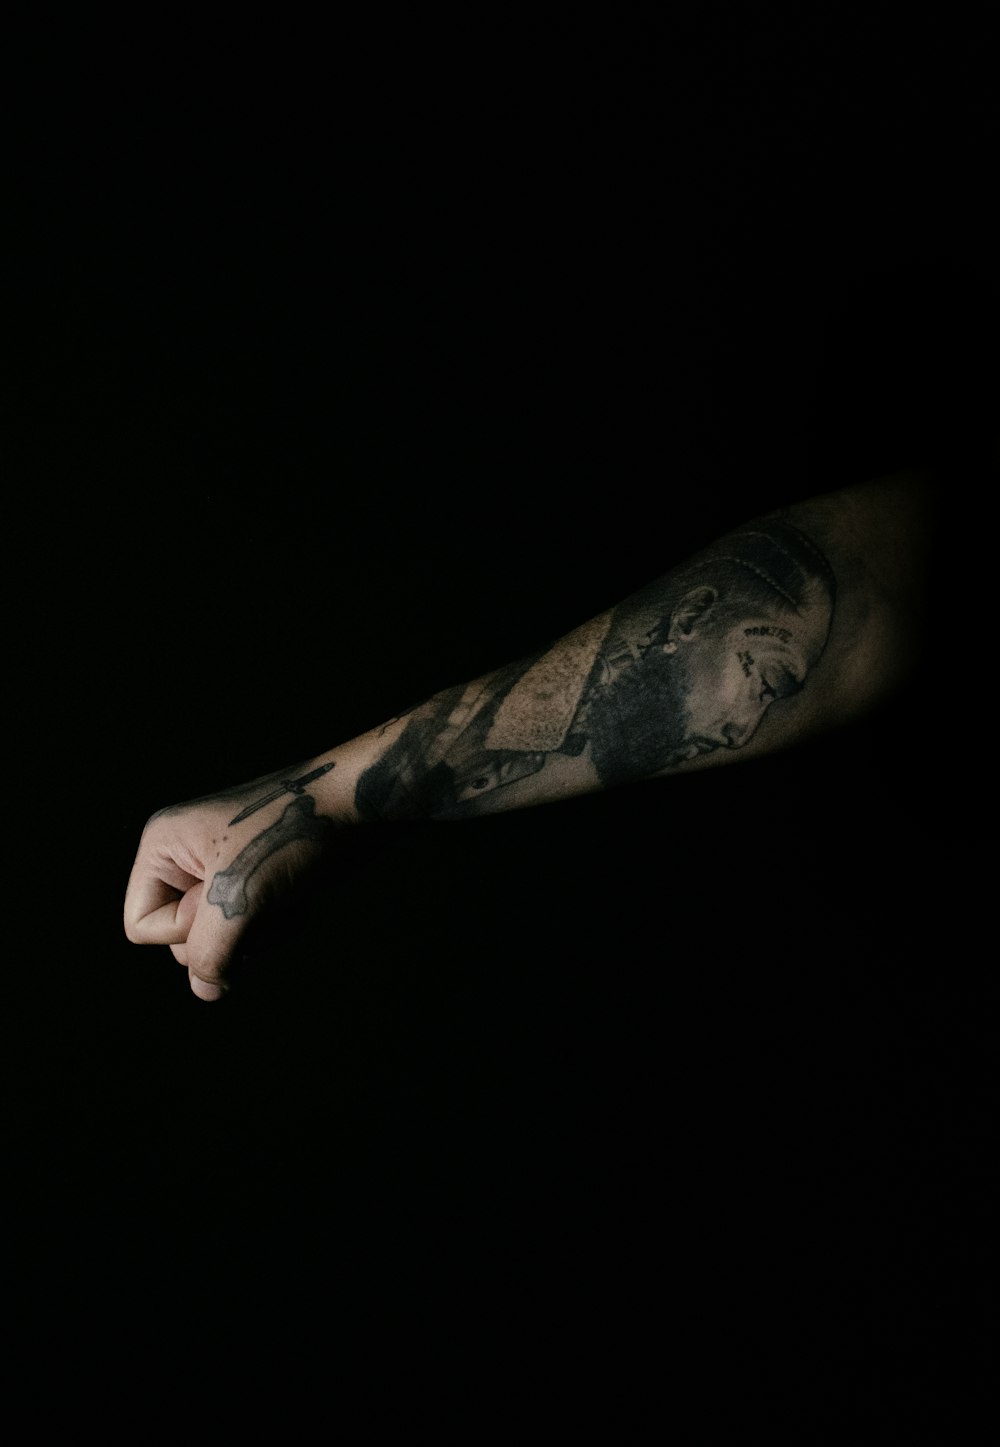 a man's arm with a tattoo on it